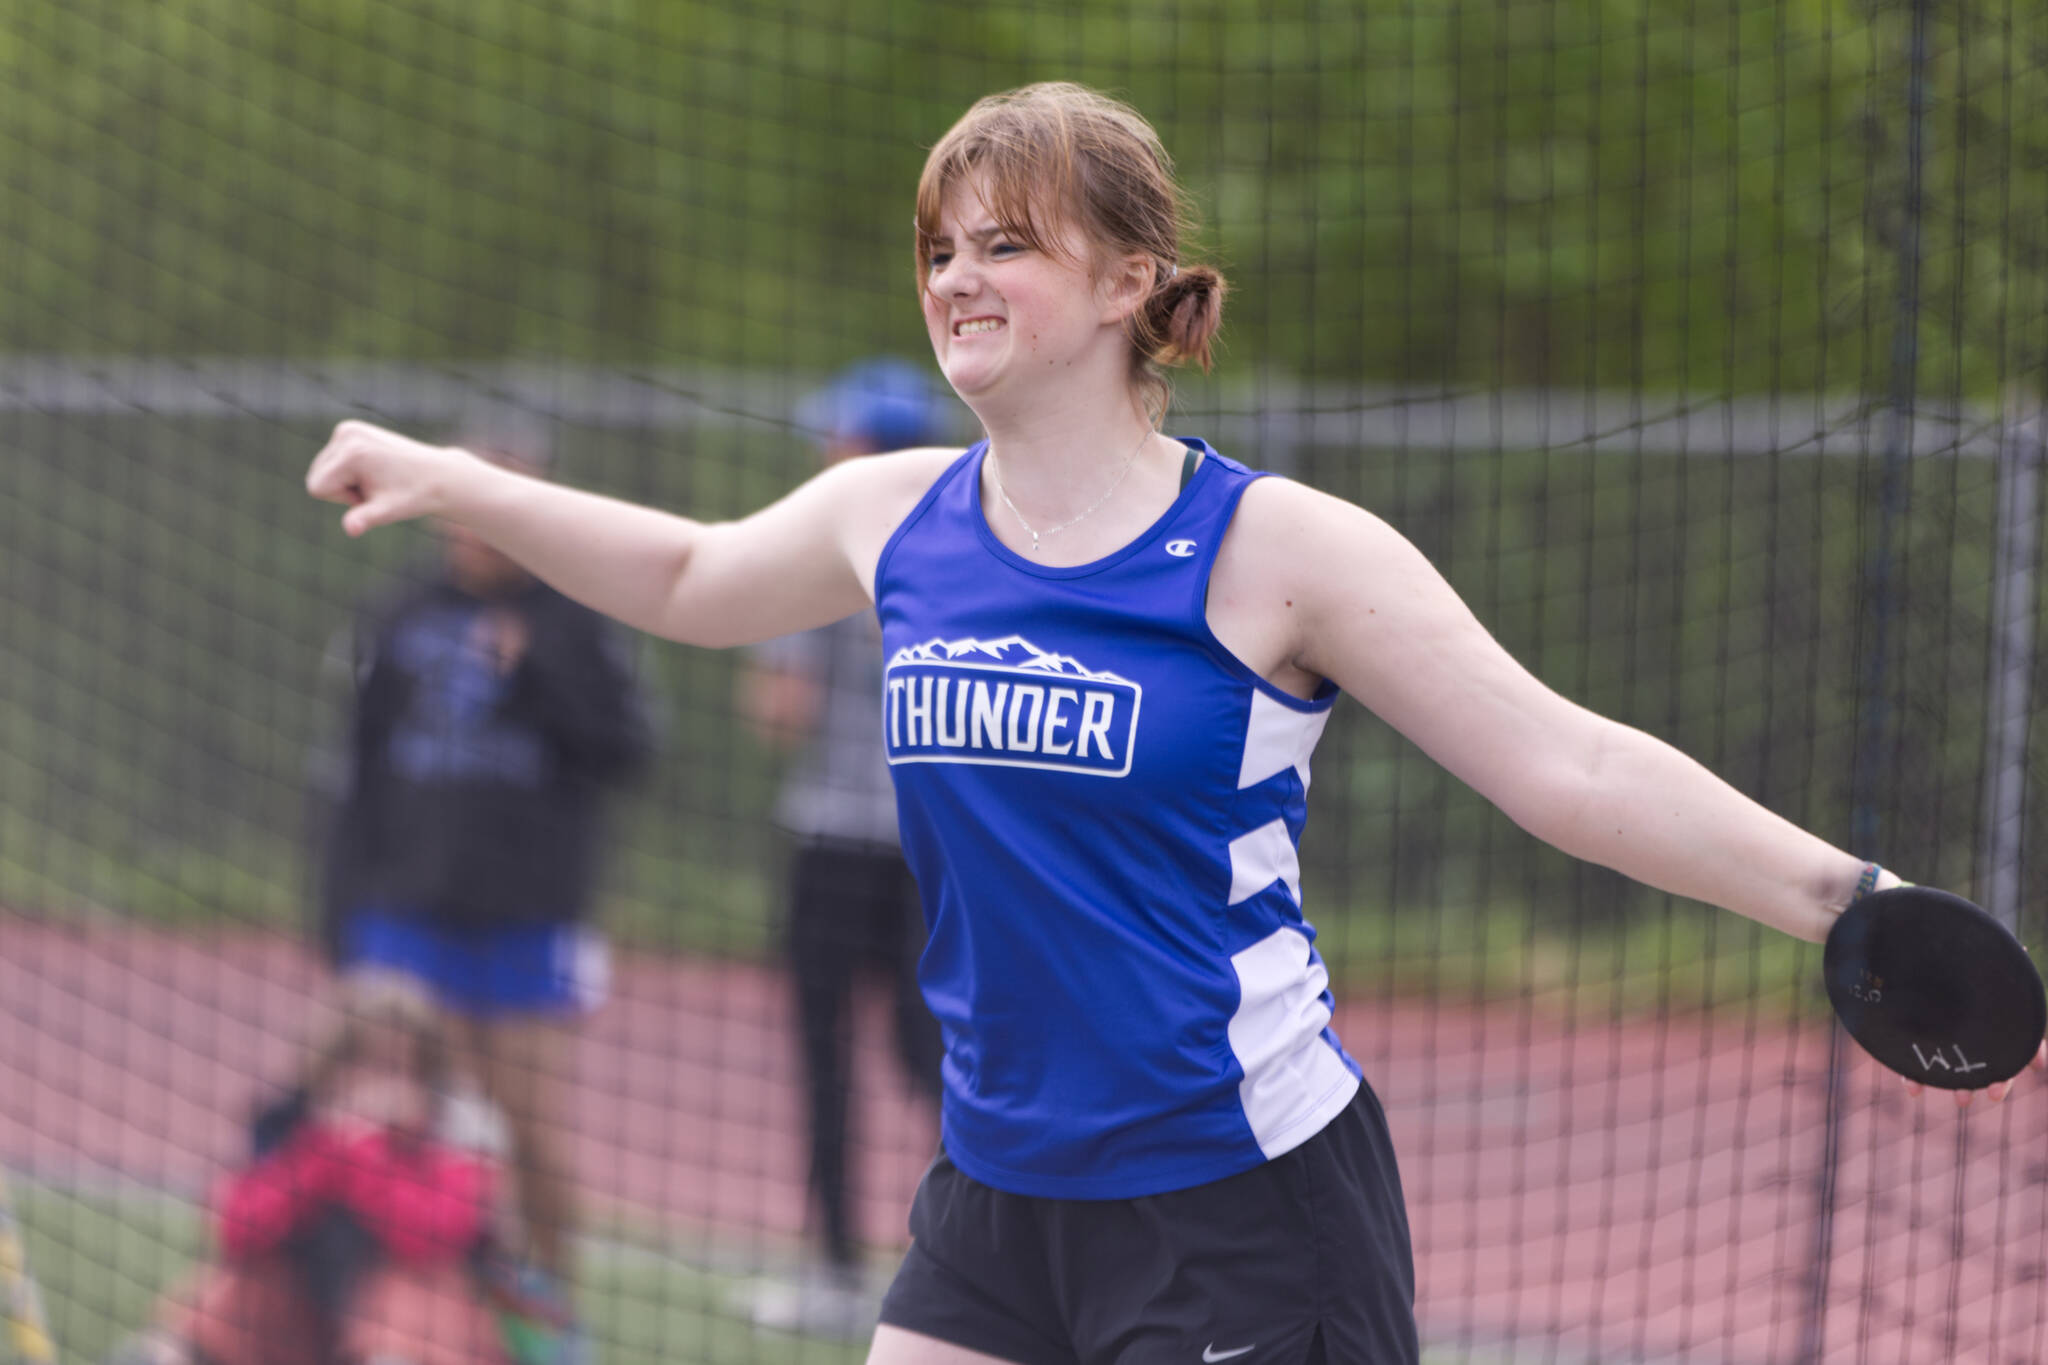 Amelia Lockwood, a Thunder Mountain sophomore, grits her teeth before sending a discus sailing. Lockwood placed second in Division I girls discus with a distance of 61 feet and 3 inches at the Region V Track & Field Championships held Friday and Saturday at TMHS. (Ben Hohenstatt / Juneau Empire)